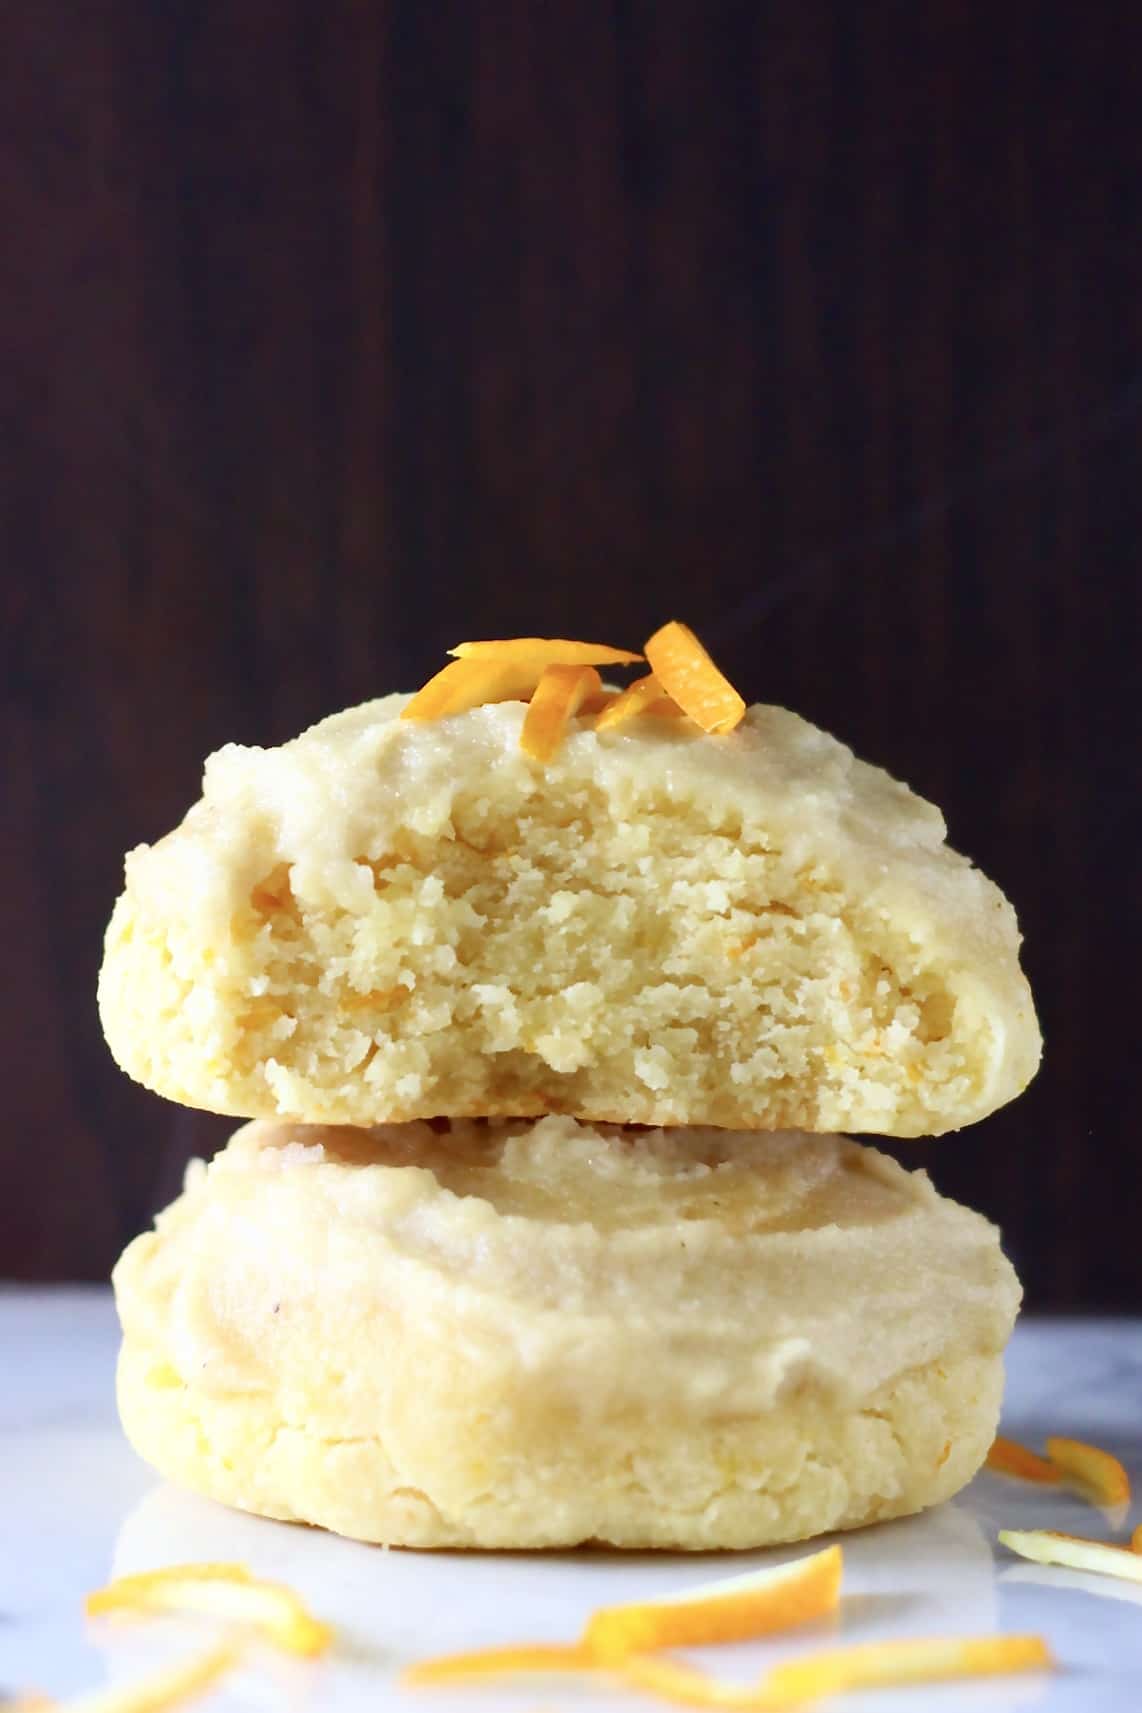 Two gluten-free vegan orange cookies stacked on top of each other, one with a bite taken out